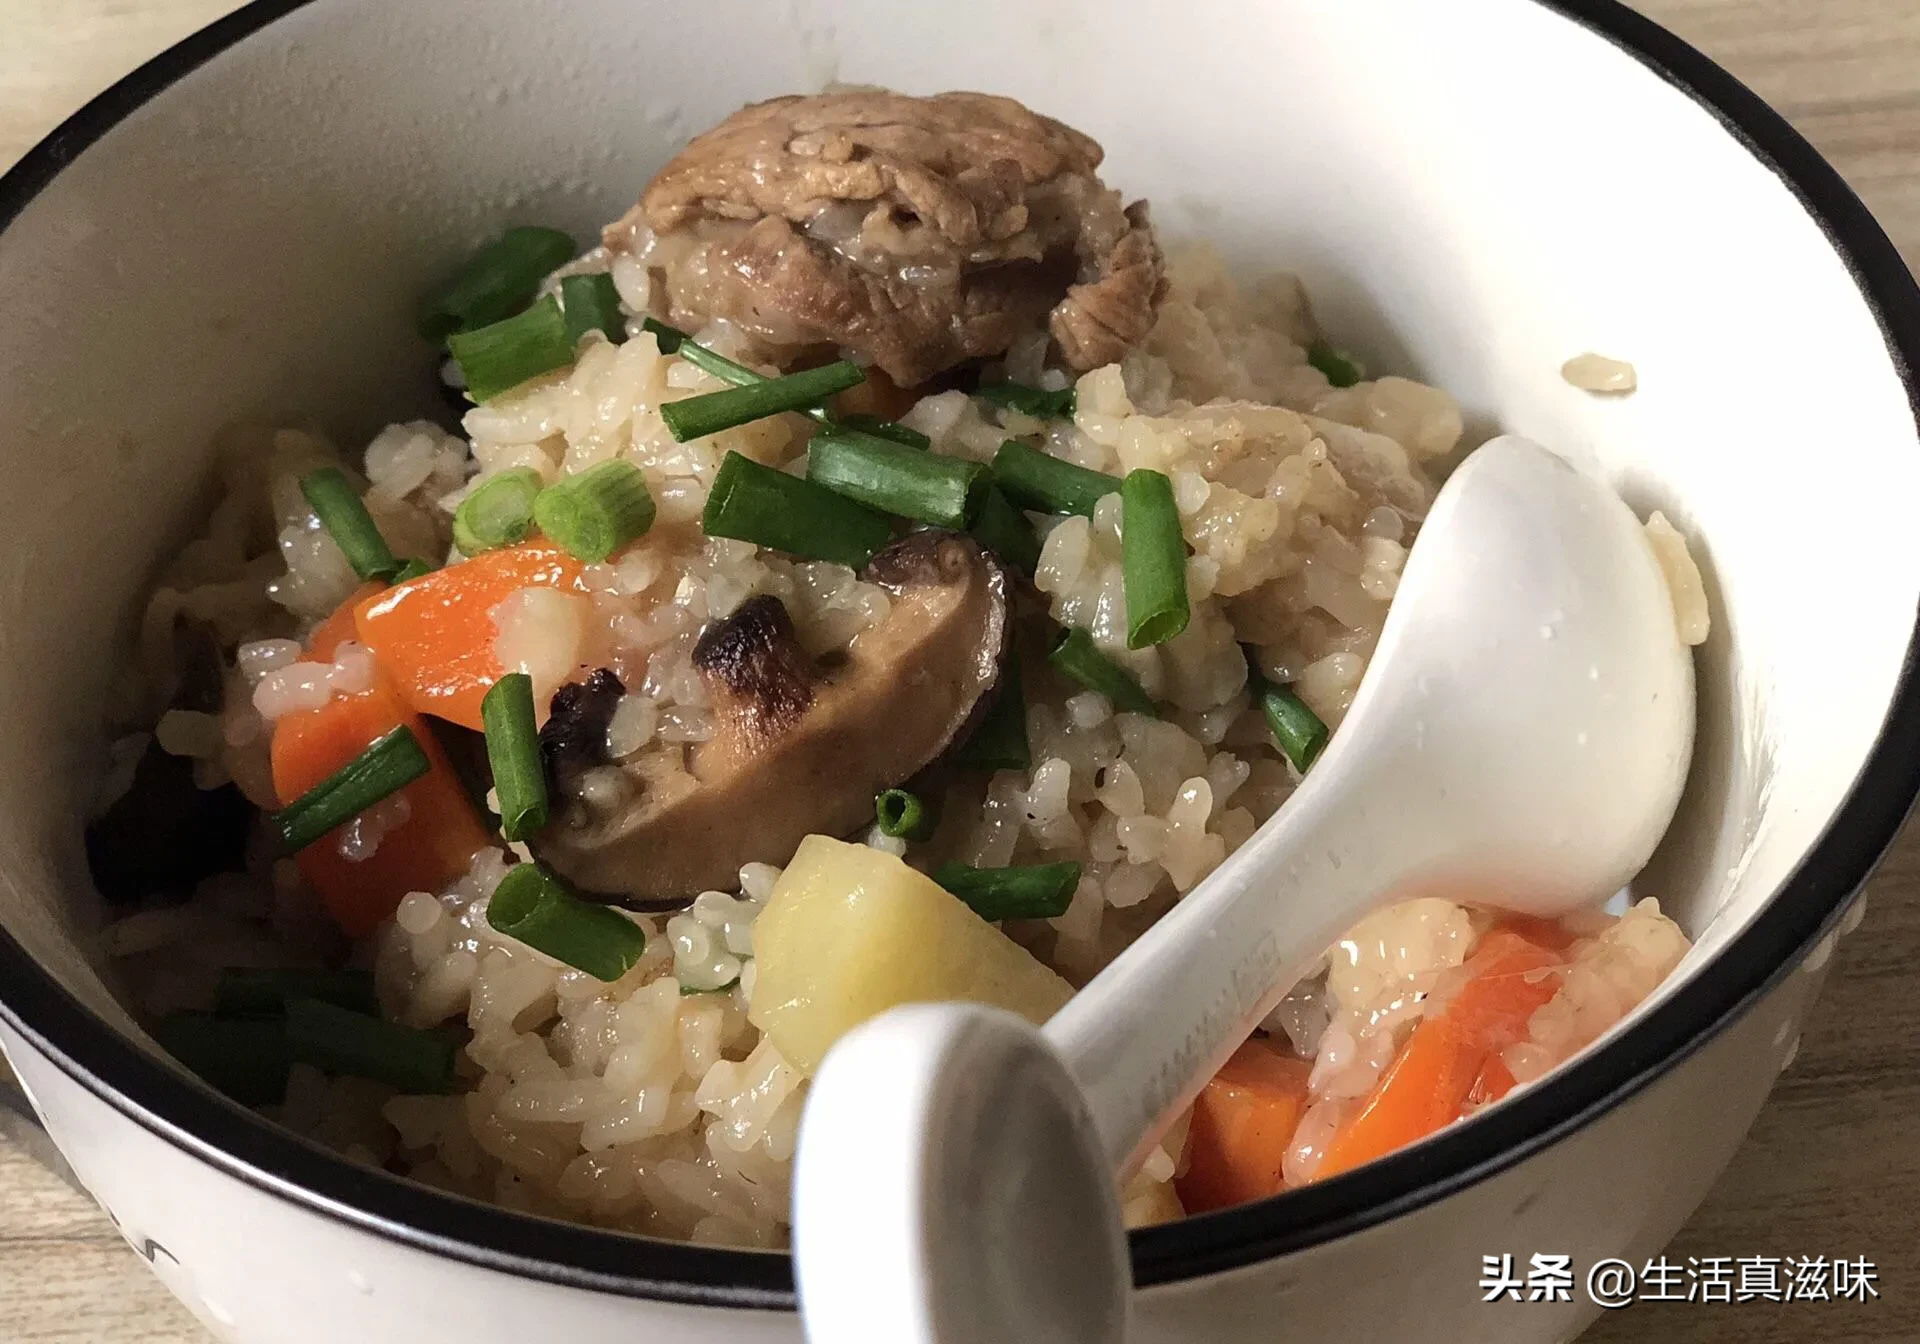 The meal of stew of dawdler edition chop of 0 failure, suit a cate of hutch art Xiaobai particularly, convenient and delicious